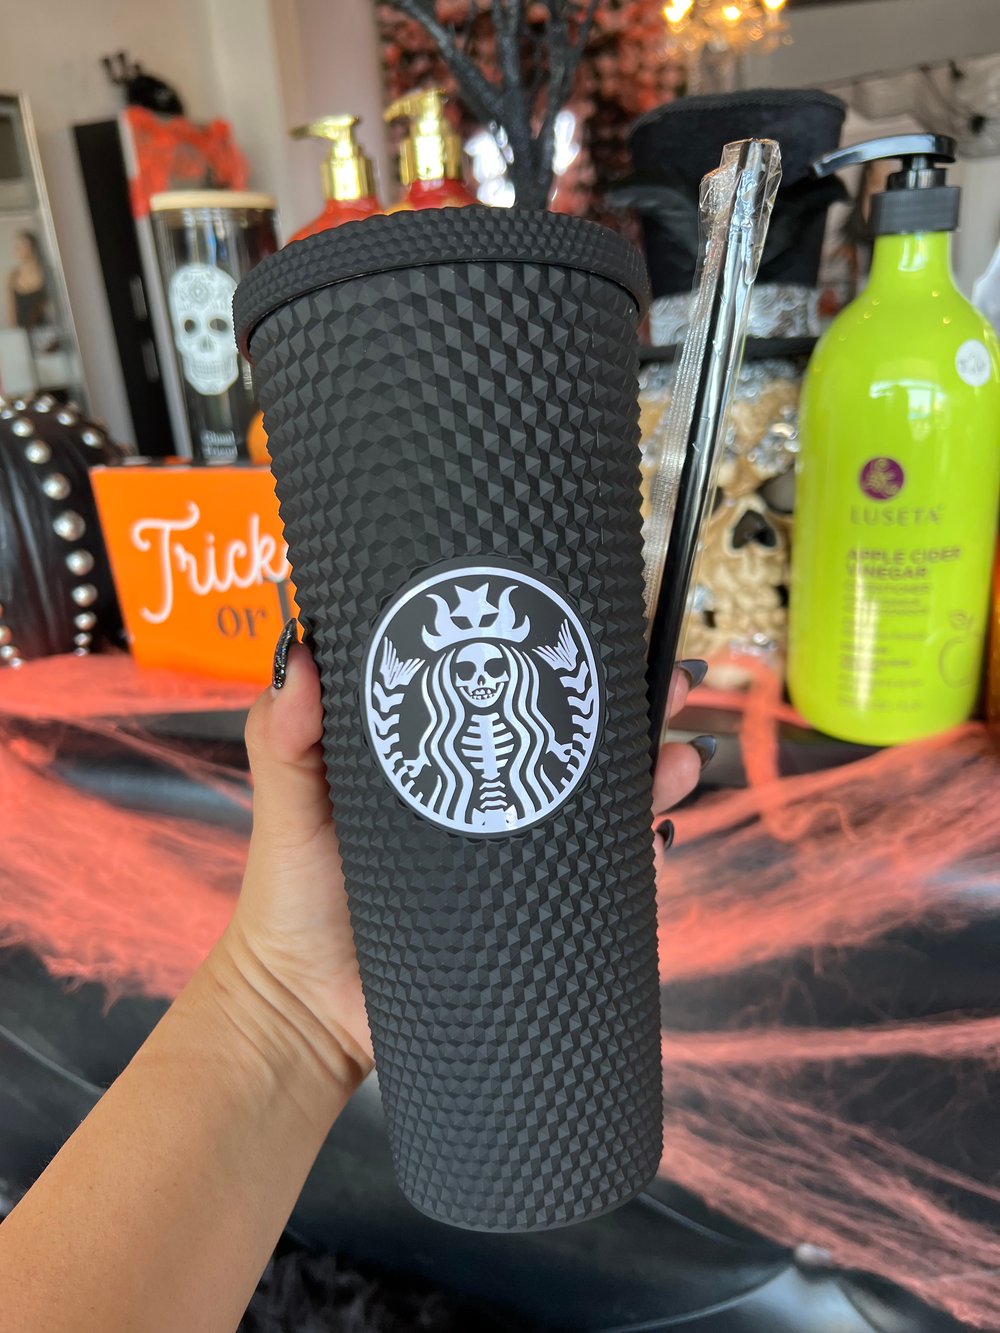 Starbys skelly cup 